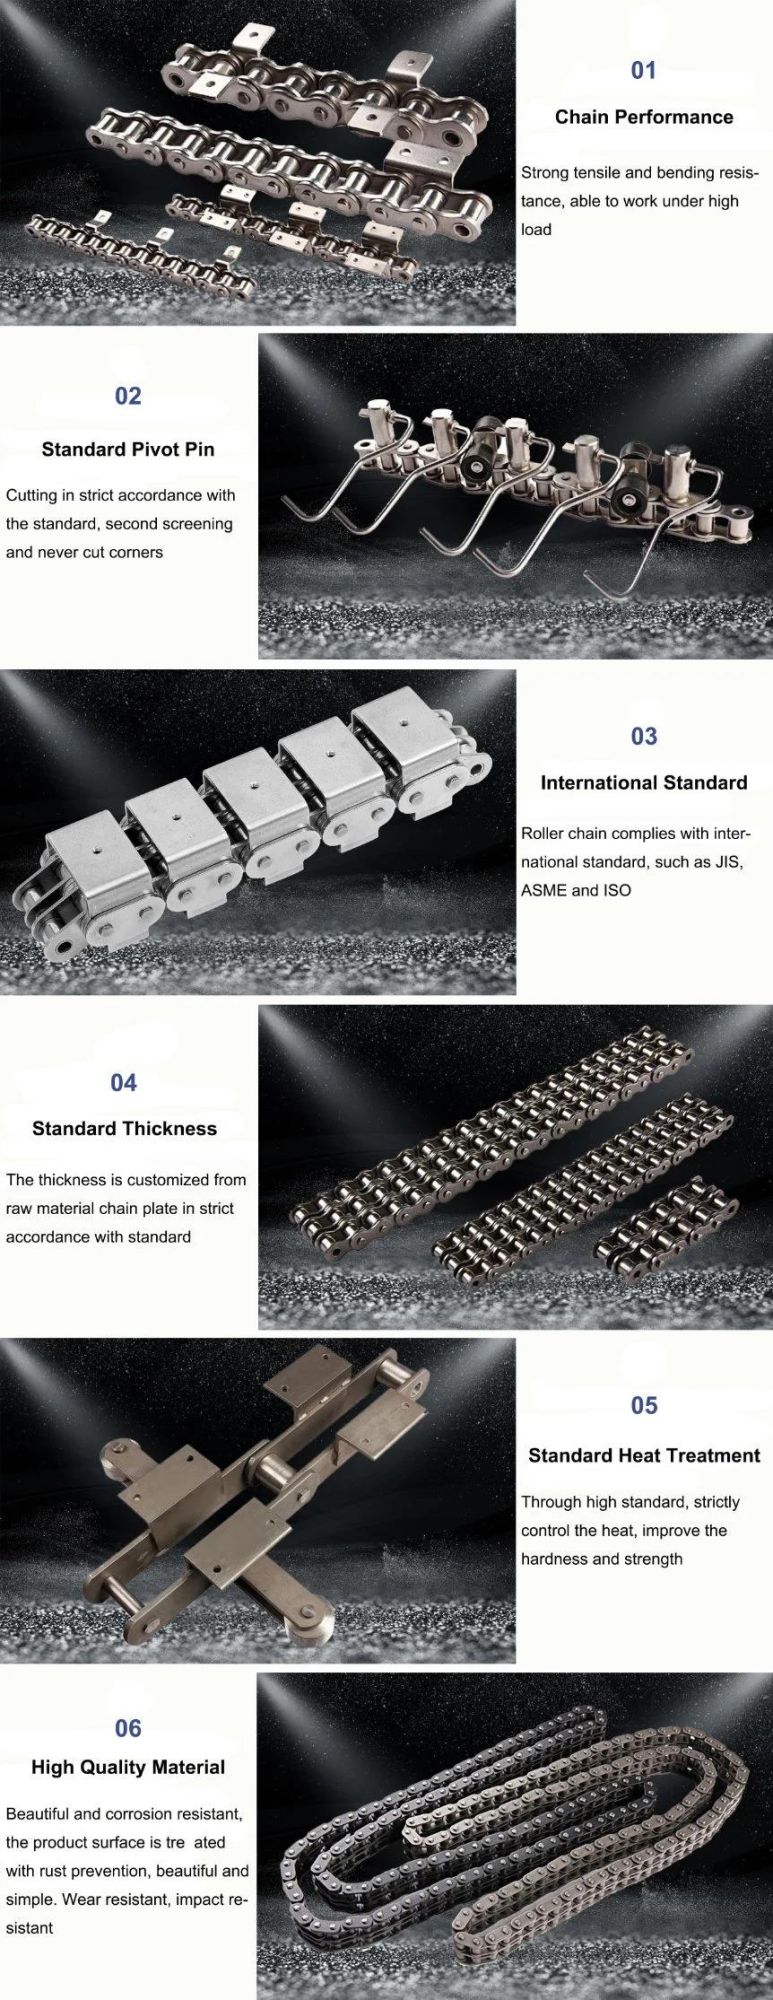 High Precision 3939 Series Attachments Stainless Steel Lumber Conveyor Roller Chain